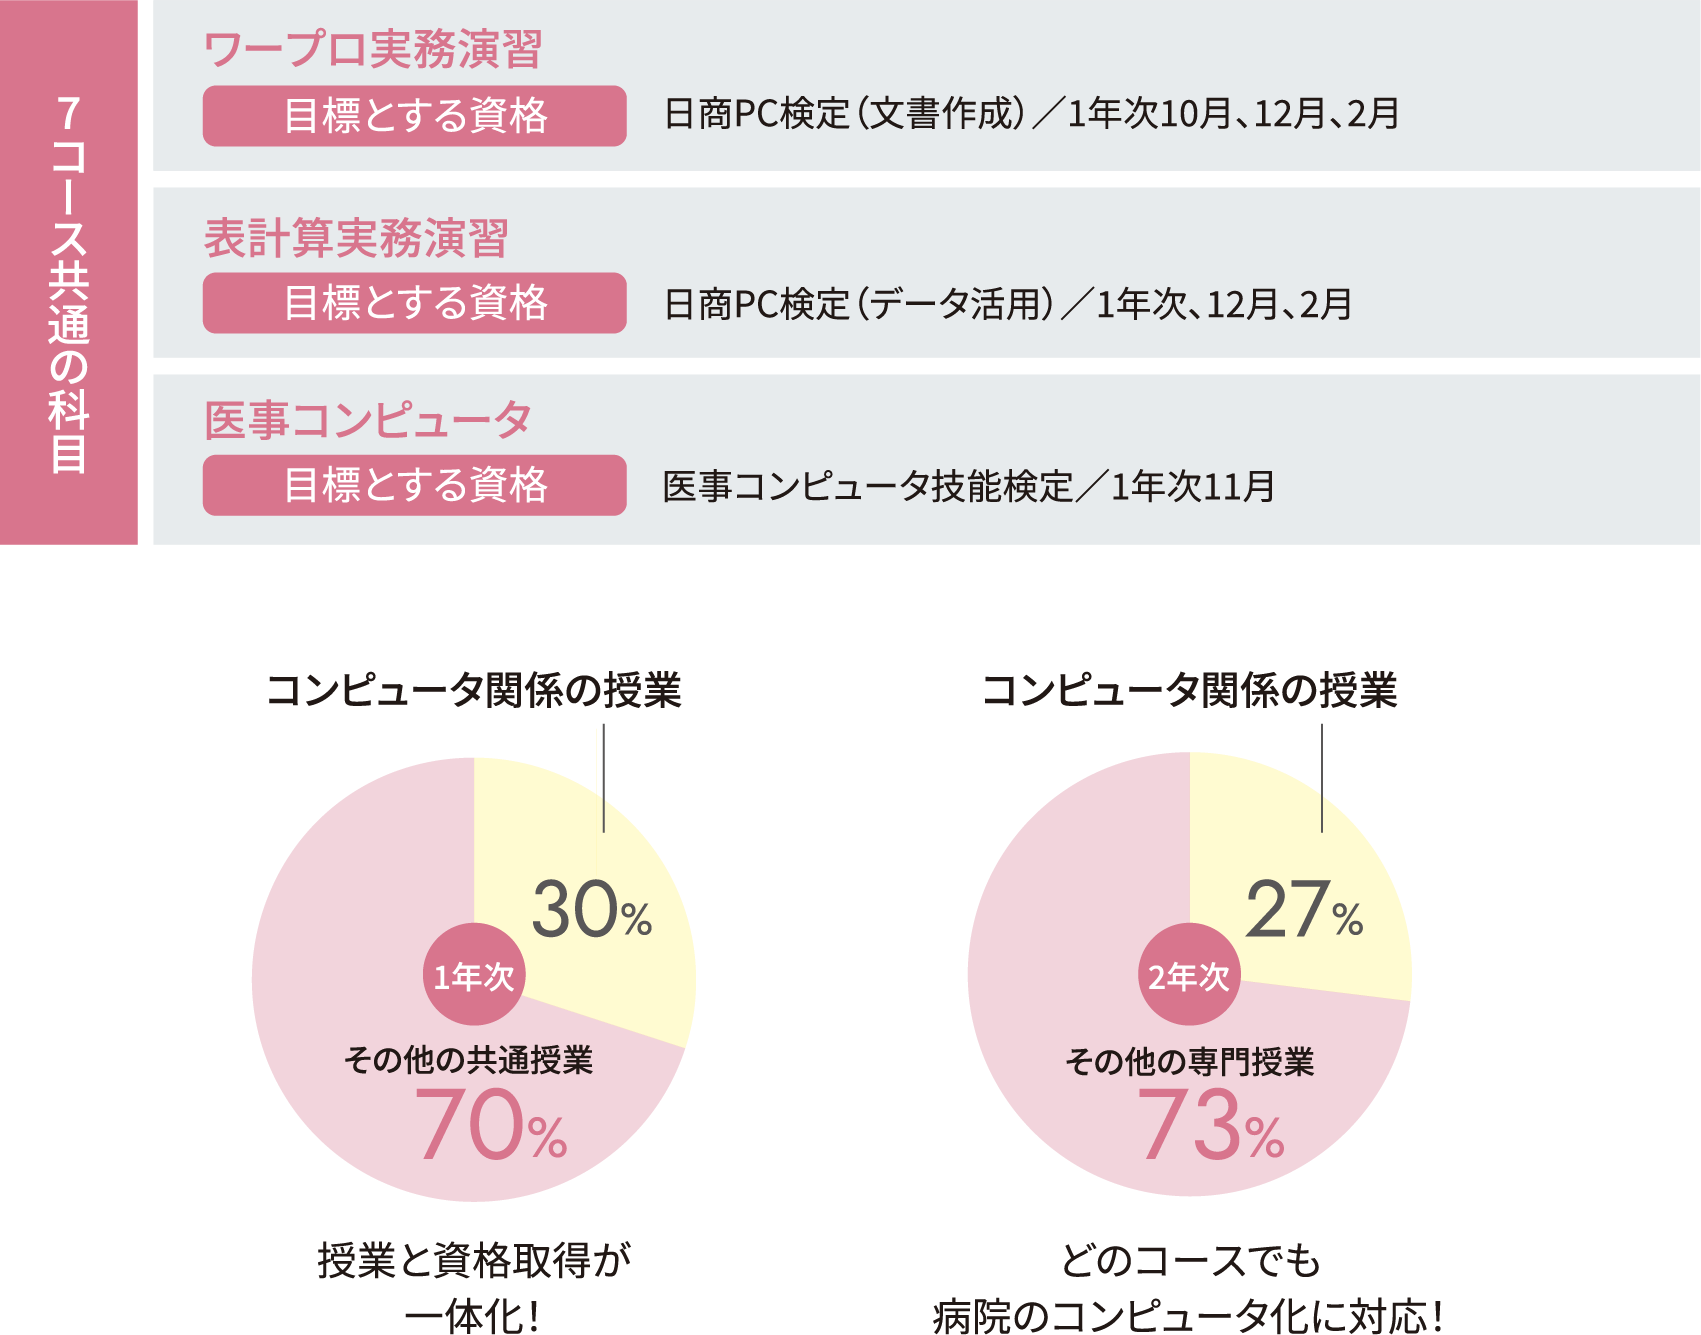 POINT 3 実務で役立つ資格取得をサポート